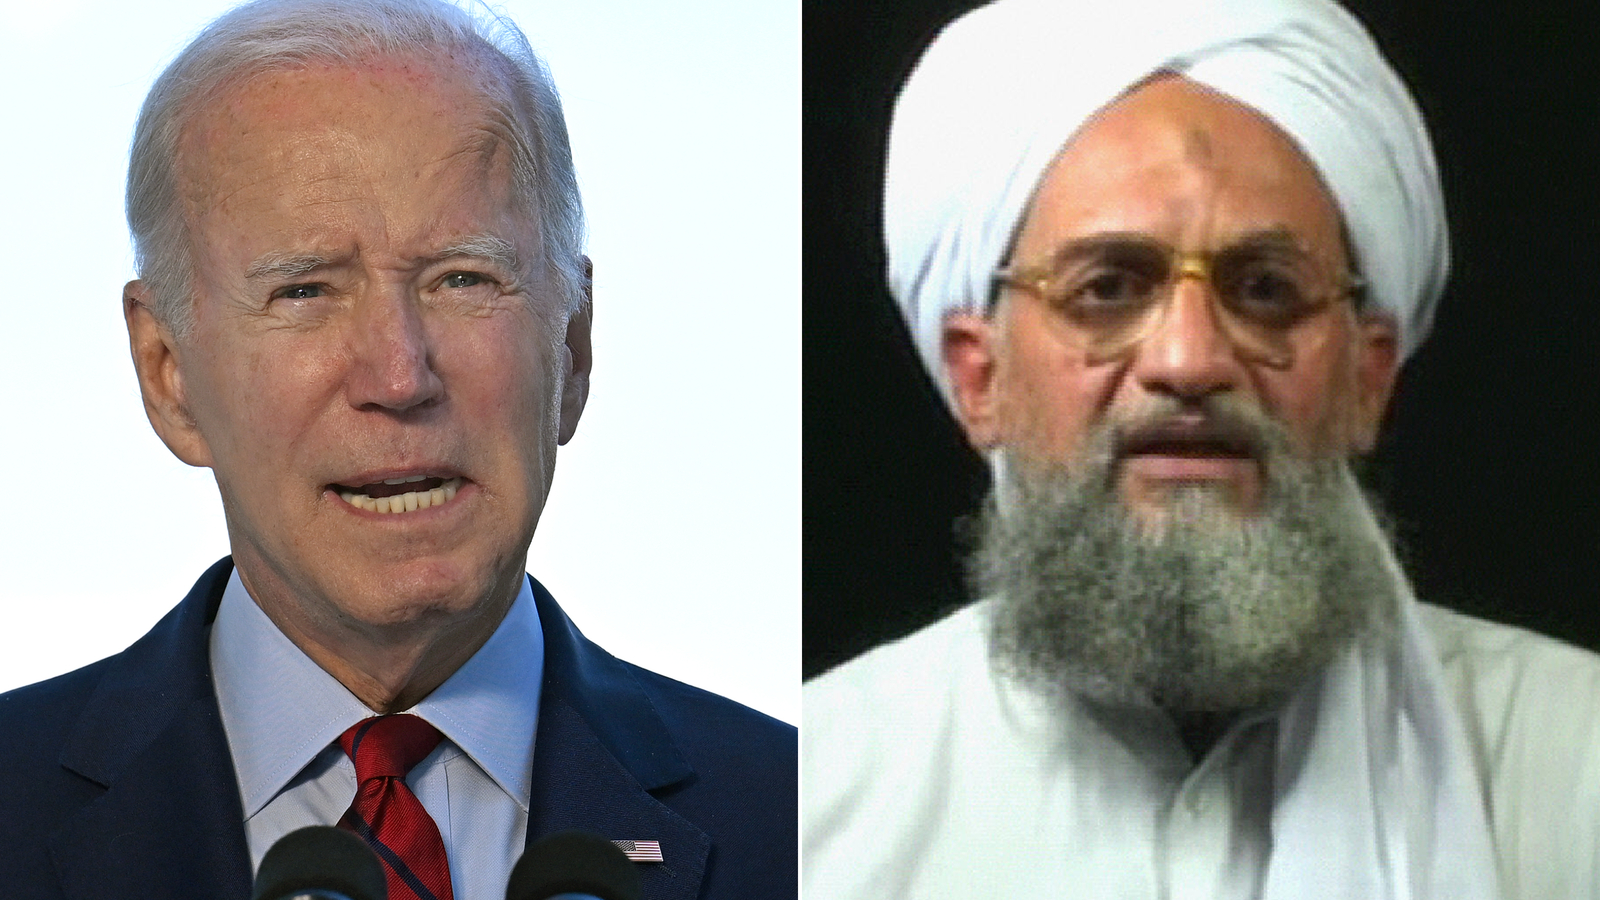 This is how Biden decided to eliminate Ayman al-Zawahiri, the world’s most wanted terrorist